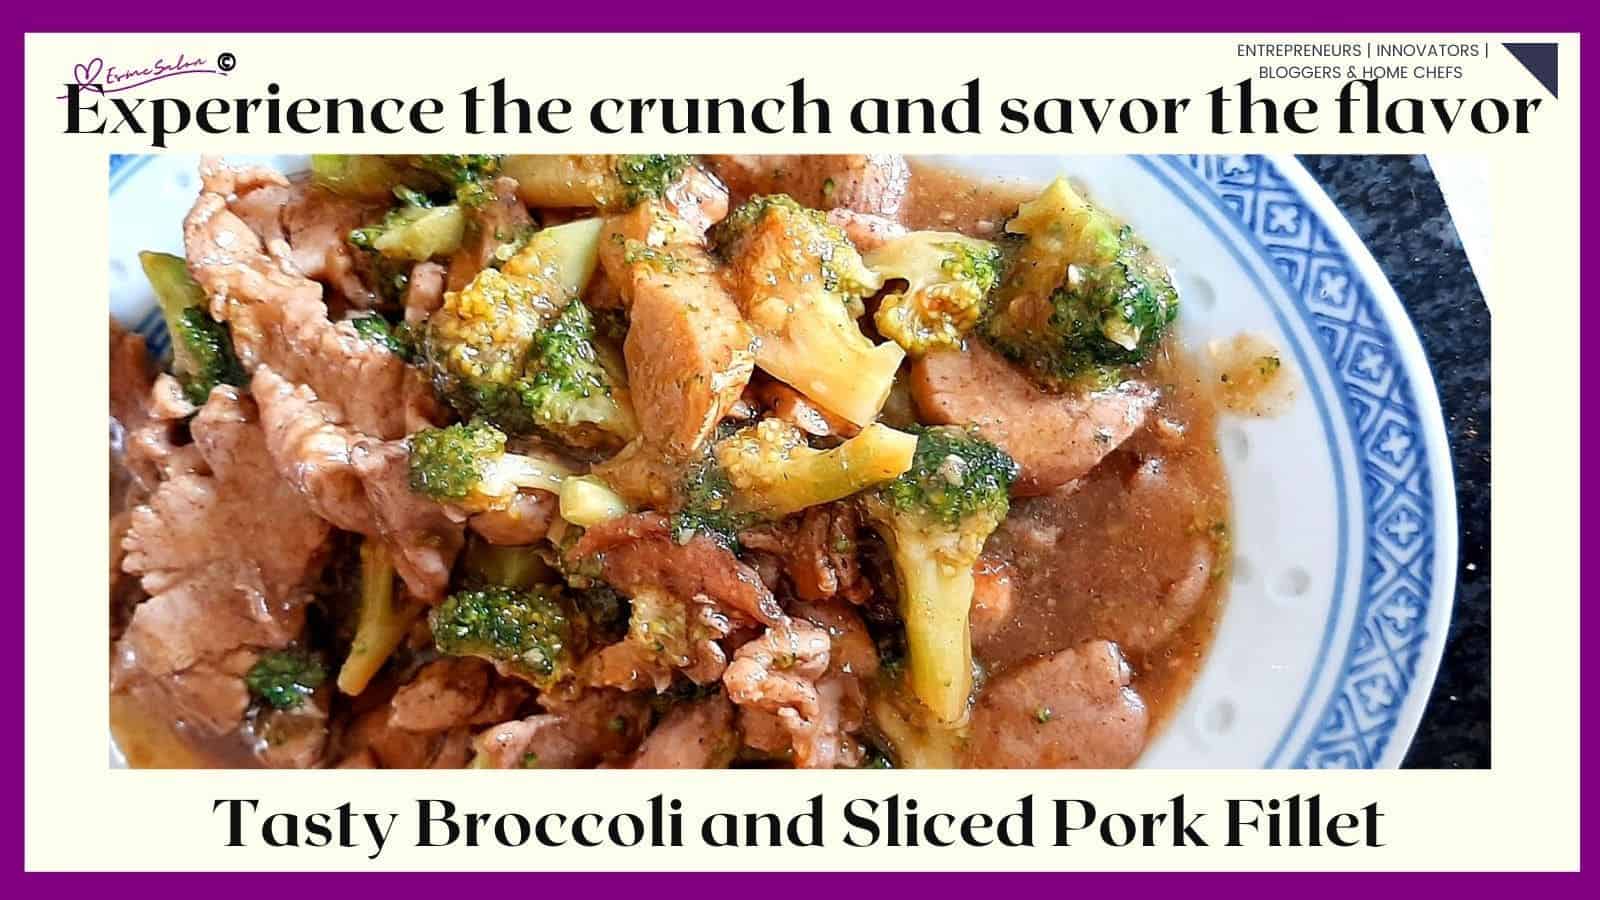 an image of a plate filled with Broccoli with Sliced Pork Fillet